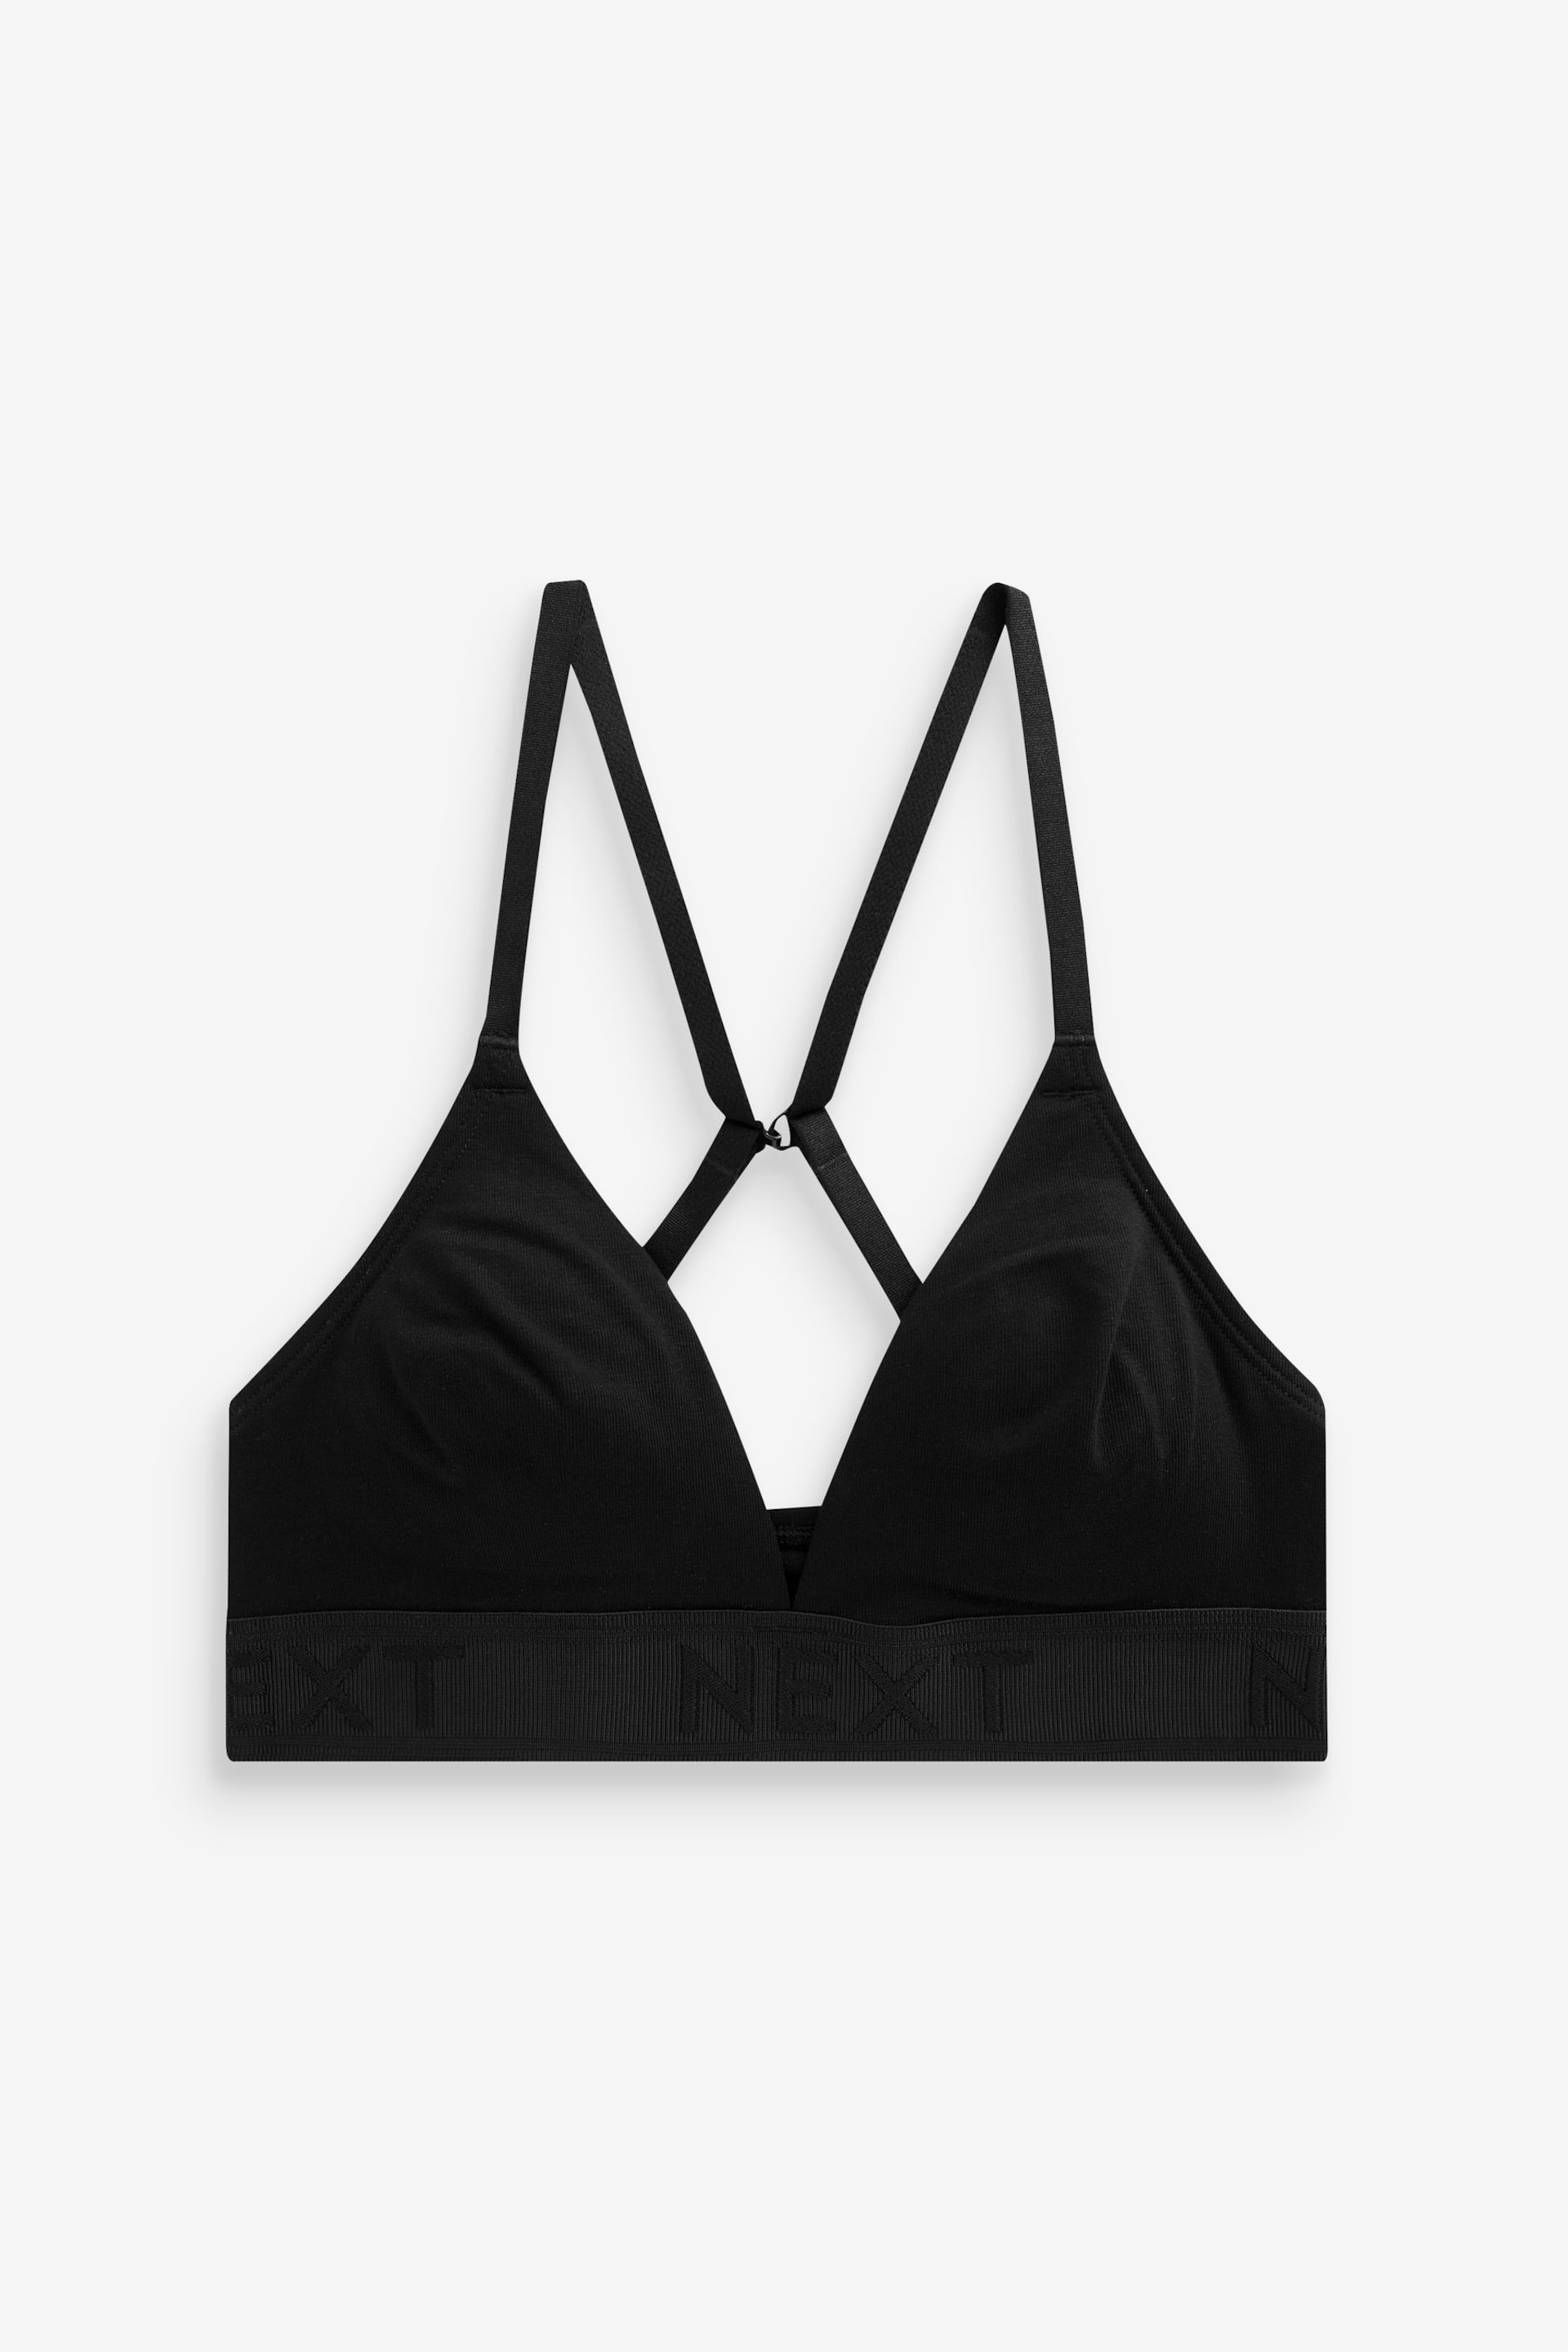 Black/White Cotton Logo Triangle Bralets 2 Pack - Image 10 of 11